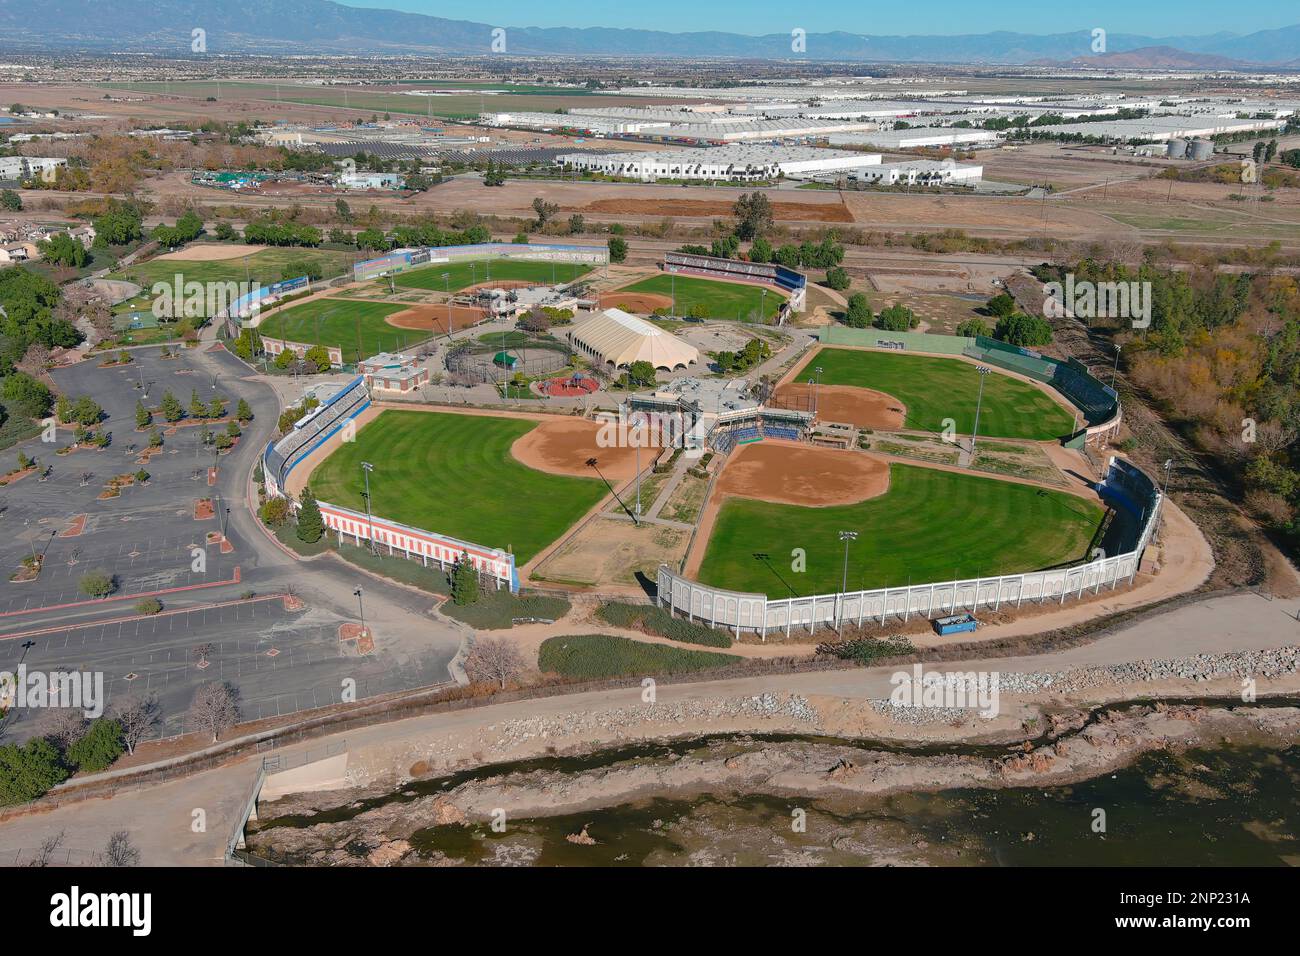 An Aerial View Of Big League Dreams Sports Park Sunday Jan 17 2021 In Chino Hills Calif